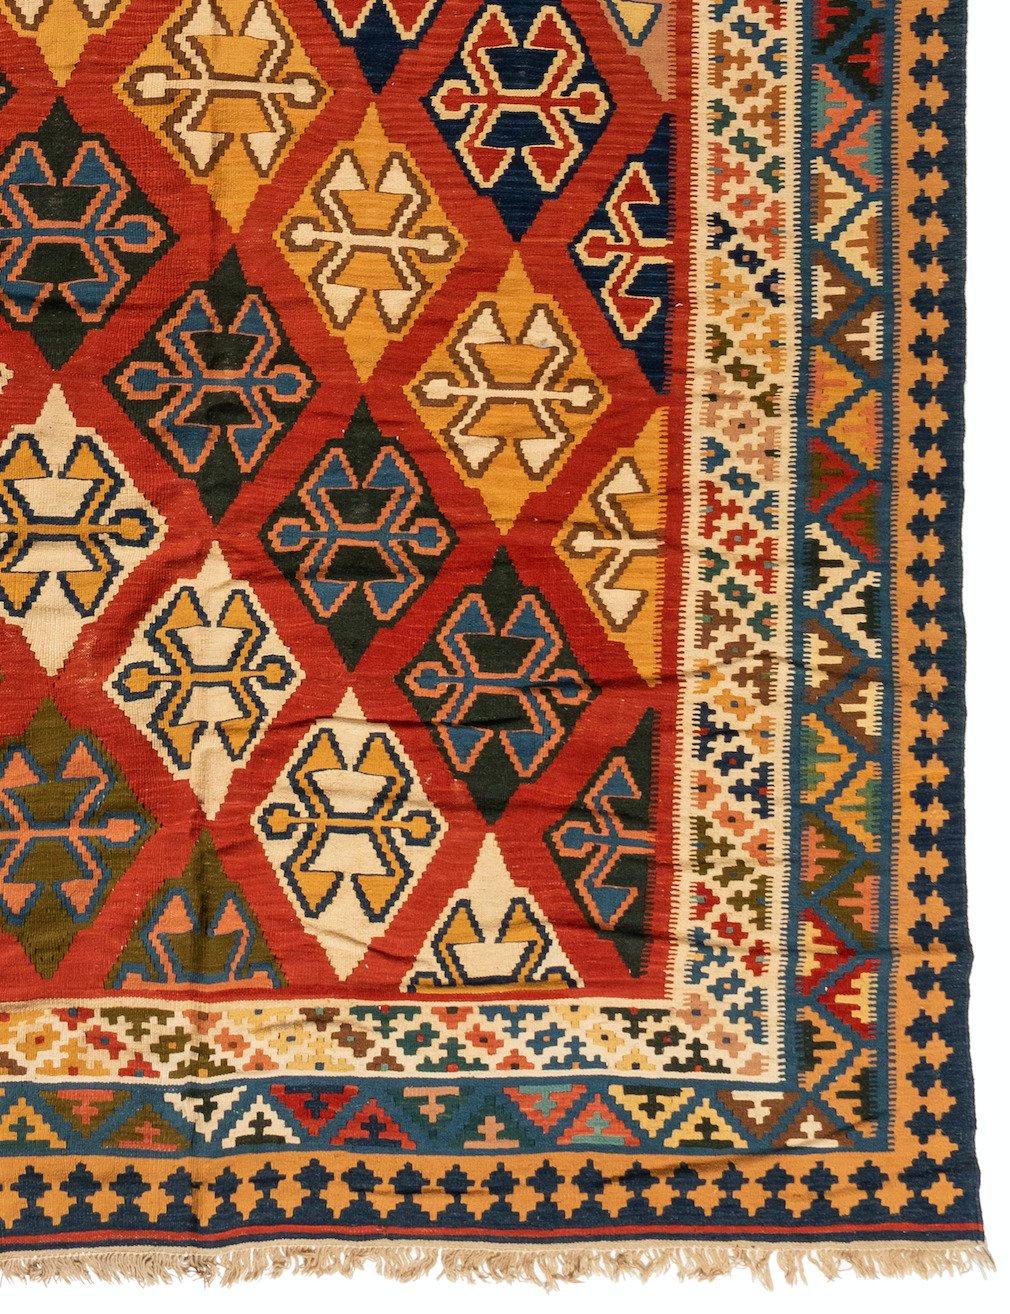 Antique Red Caucasian Kilim Geometric Rug, circa 1940s 6.10 x 10.5 ft. In Good Condition For Sale In New York, NY